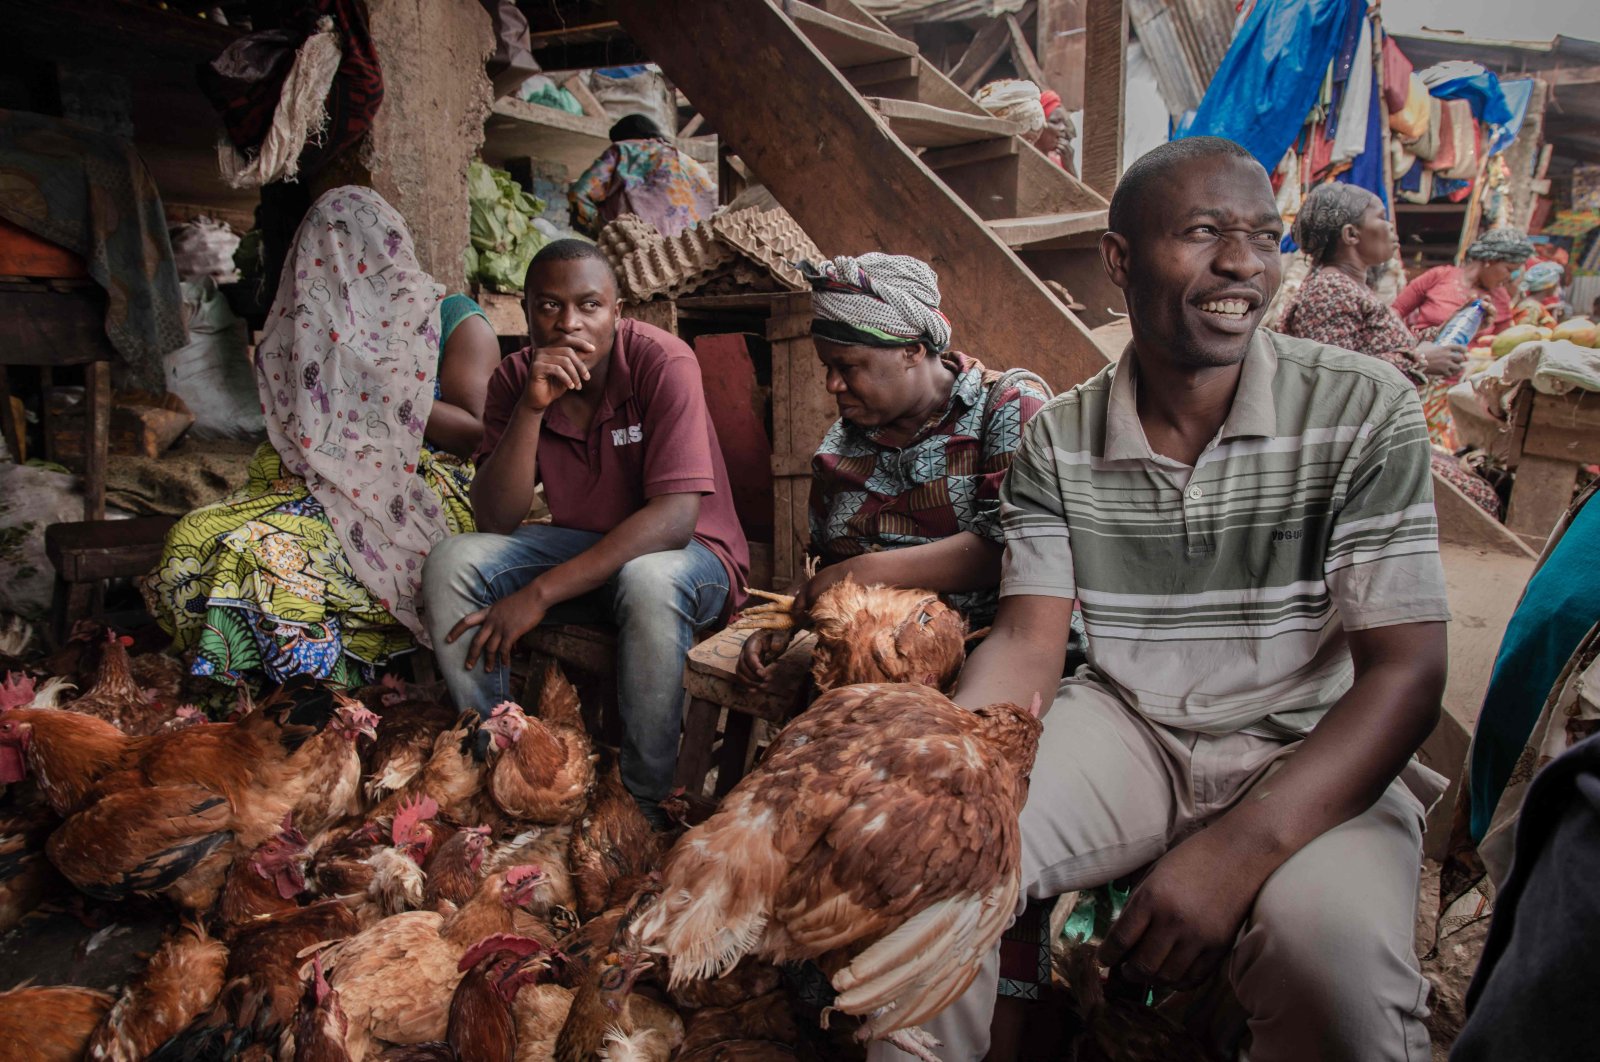 Vendors selling chickens talk to their customers in the Nyawera market in Bukavu, eastern Democratic Republic of Congo, March 16, 2022. (AFP Photo)